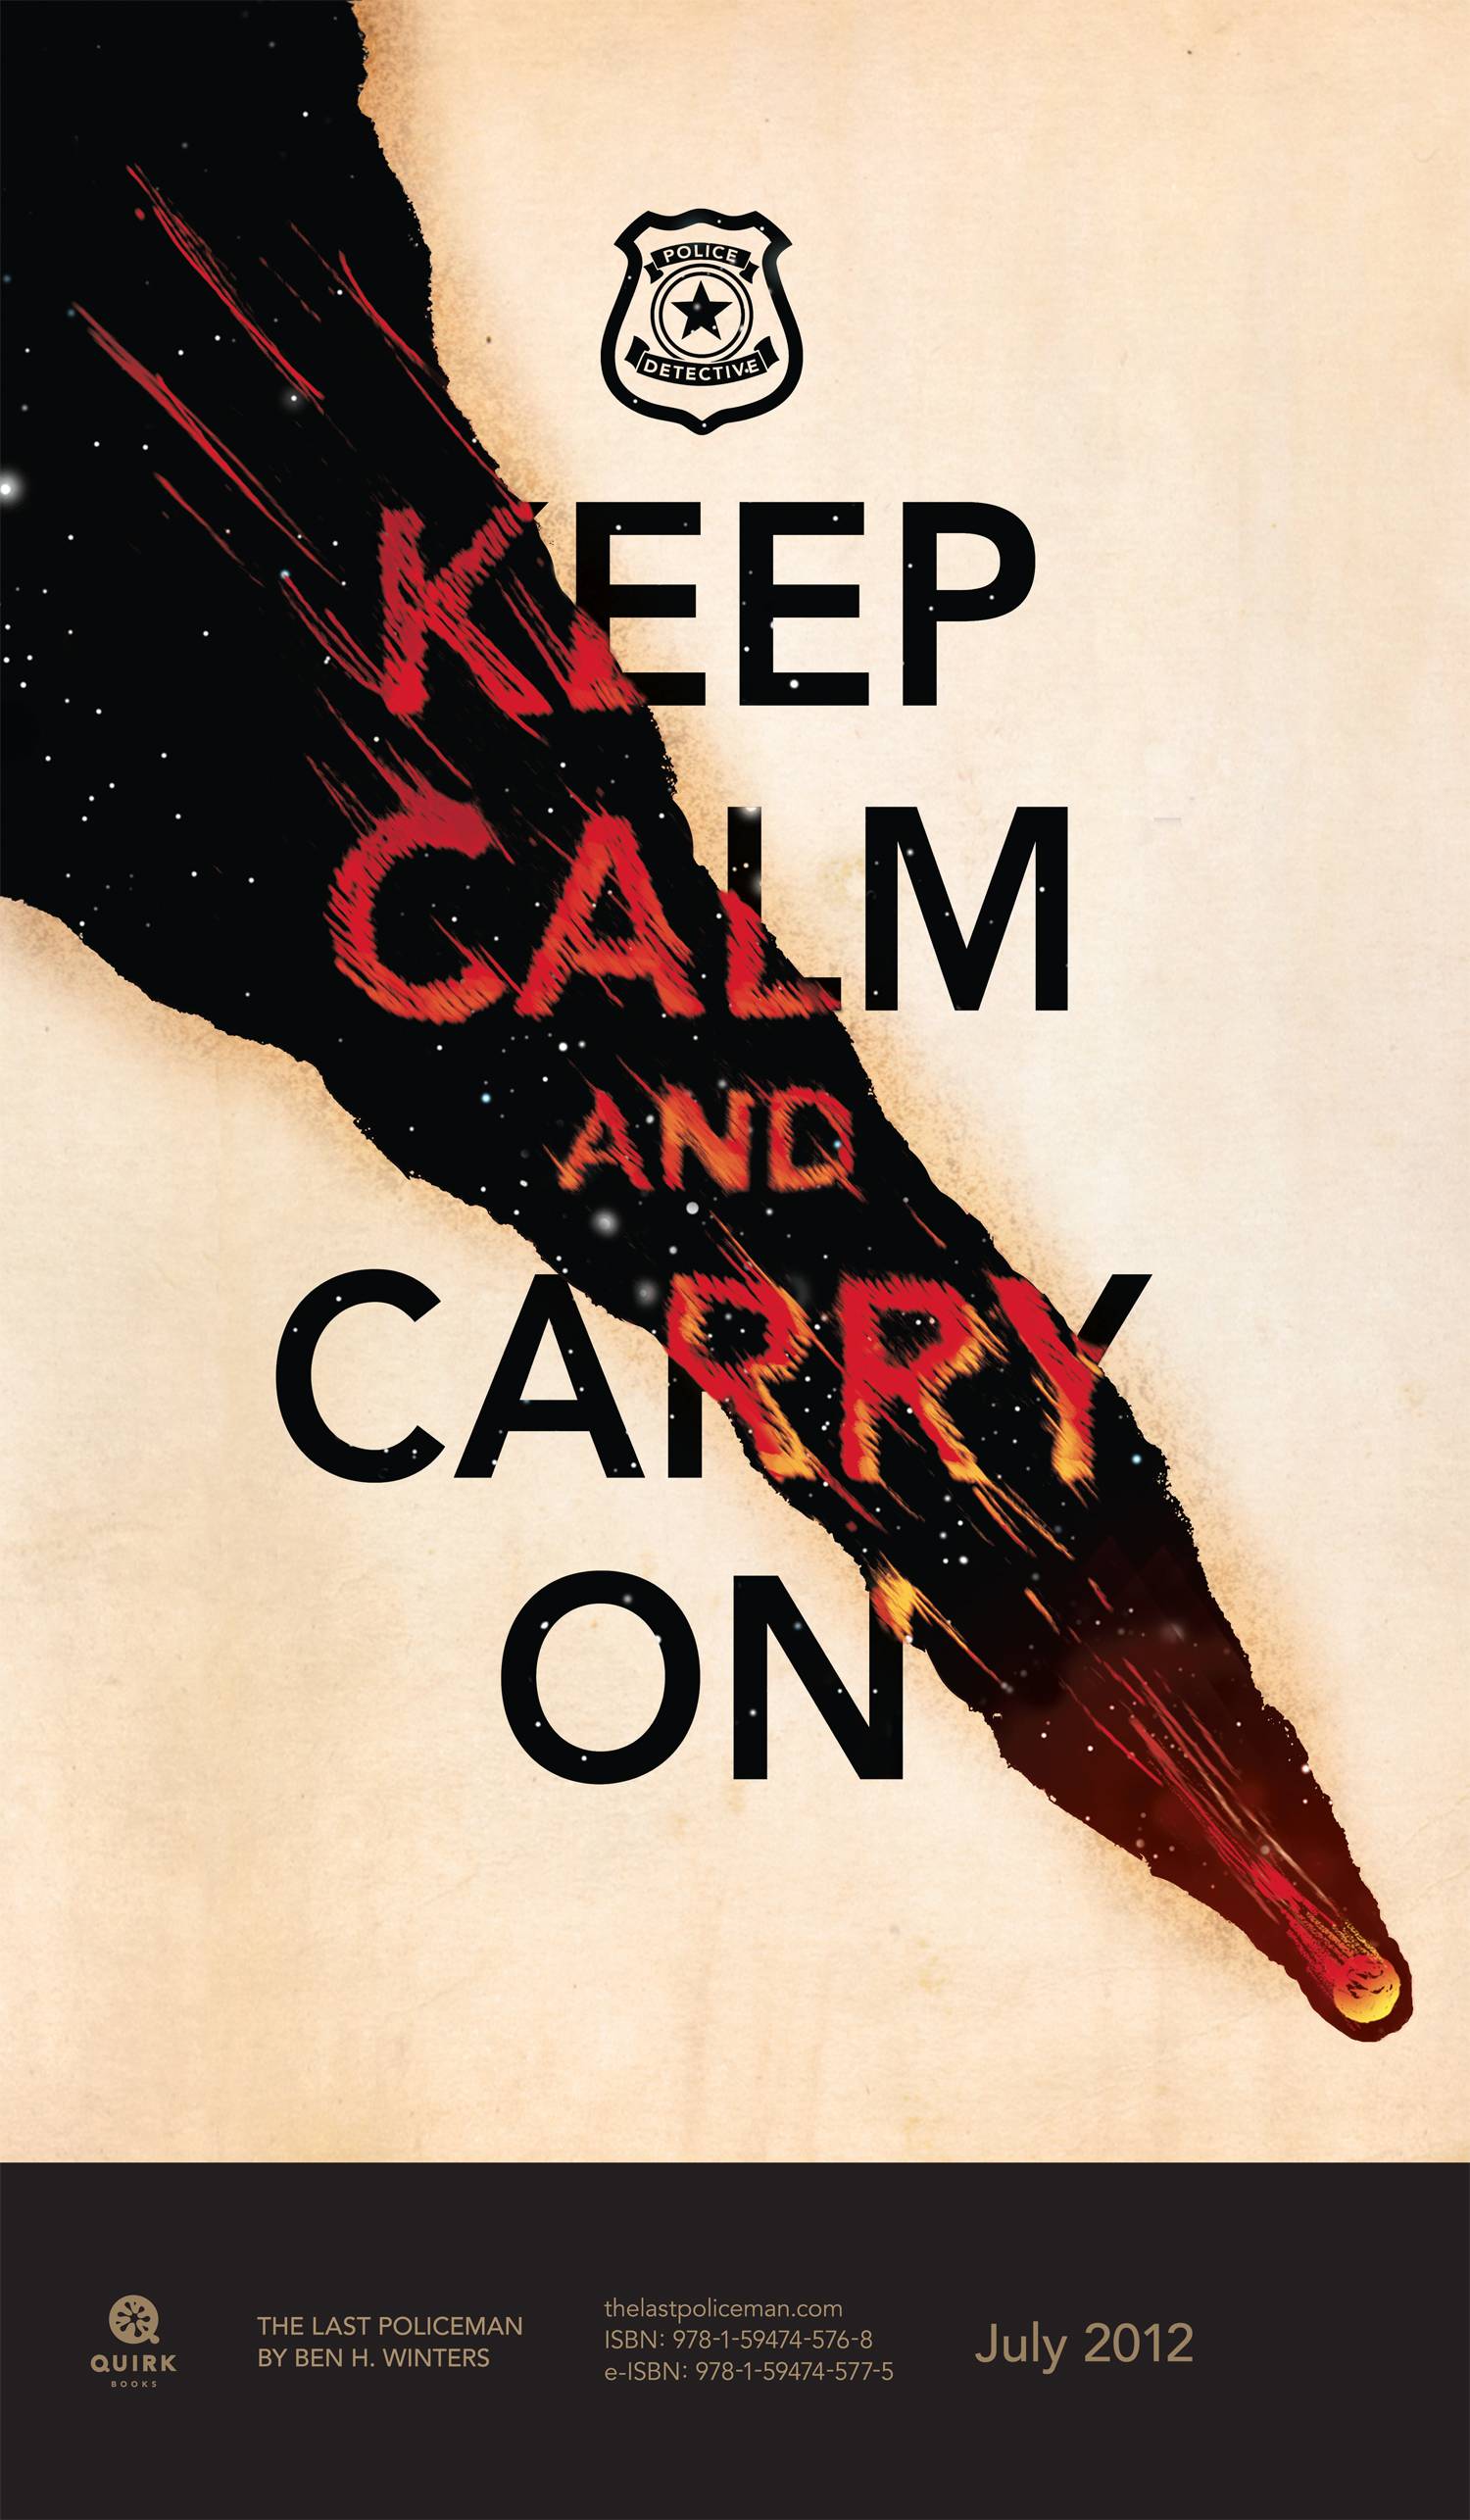 keep calm and carry on original poster